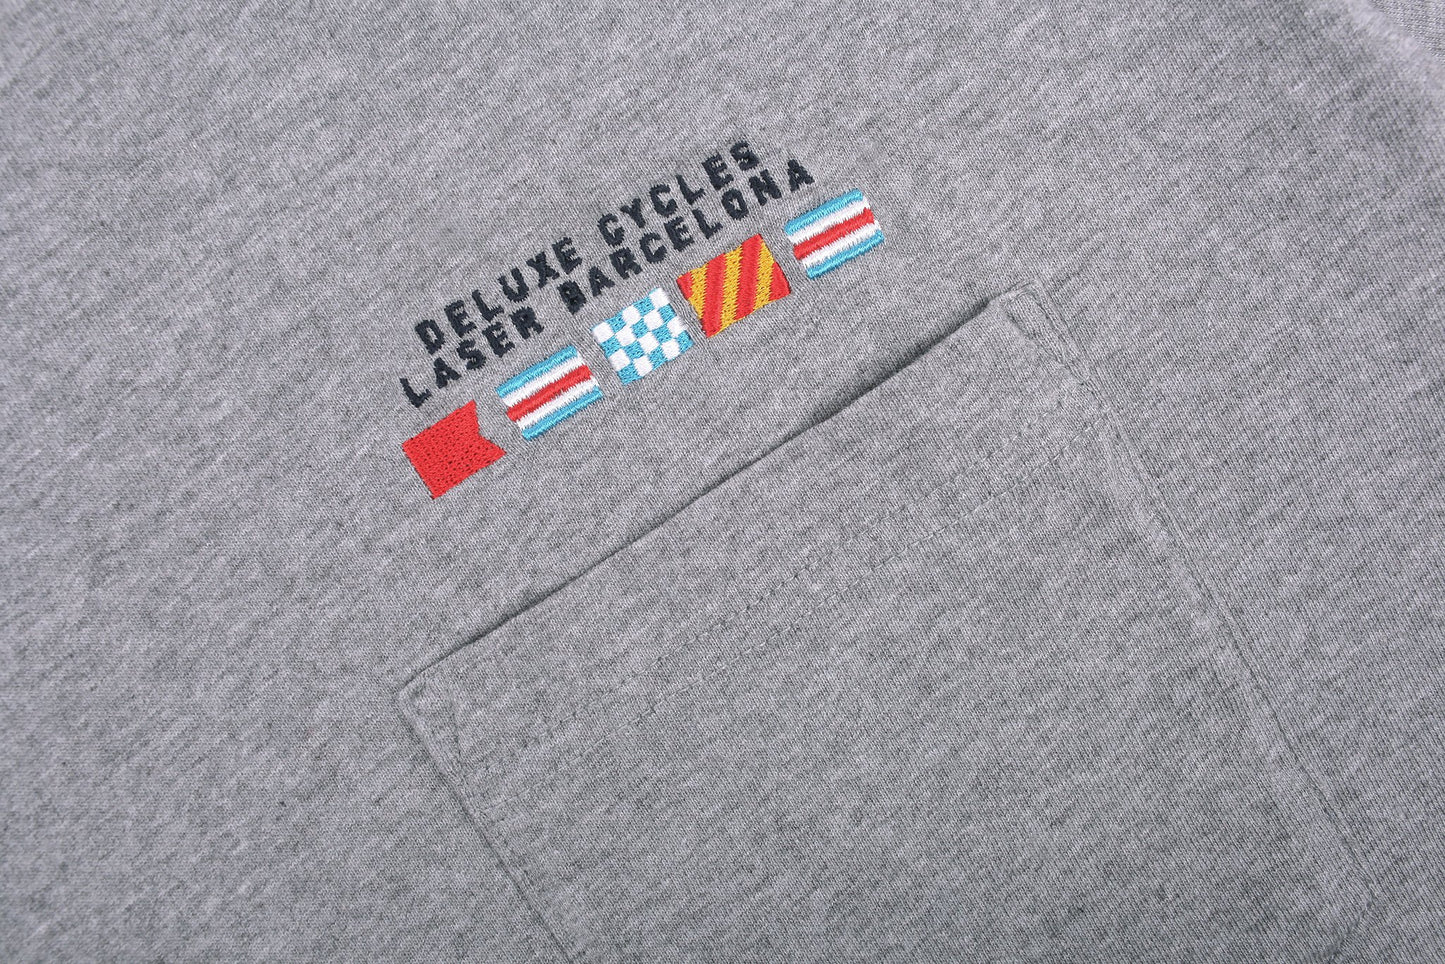 Laser Barcelona x Deluxe Cycles - CITY FLAGS WOVEN POCKET TEE  - GREY